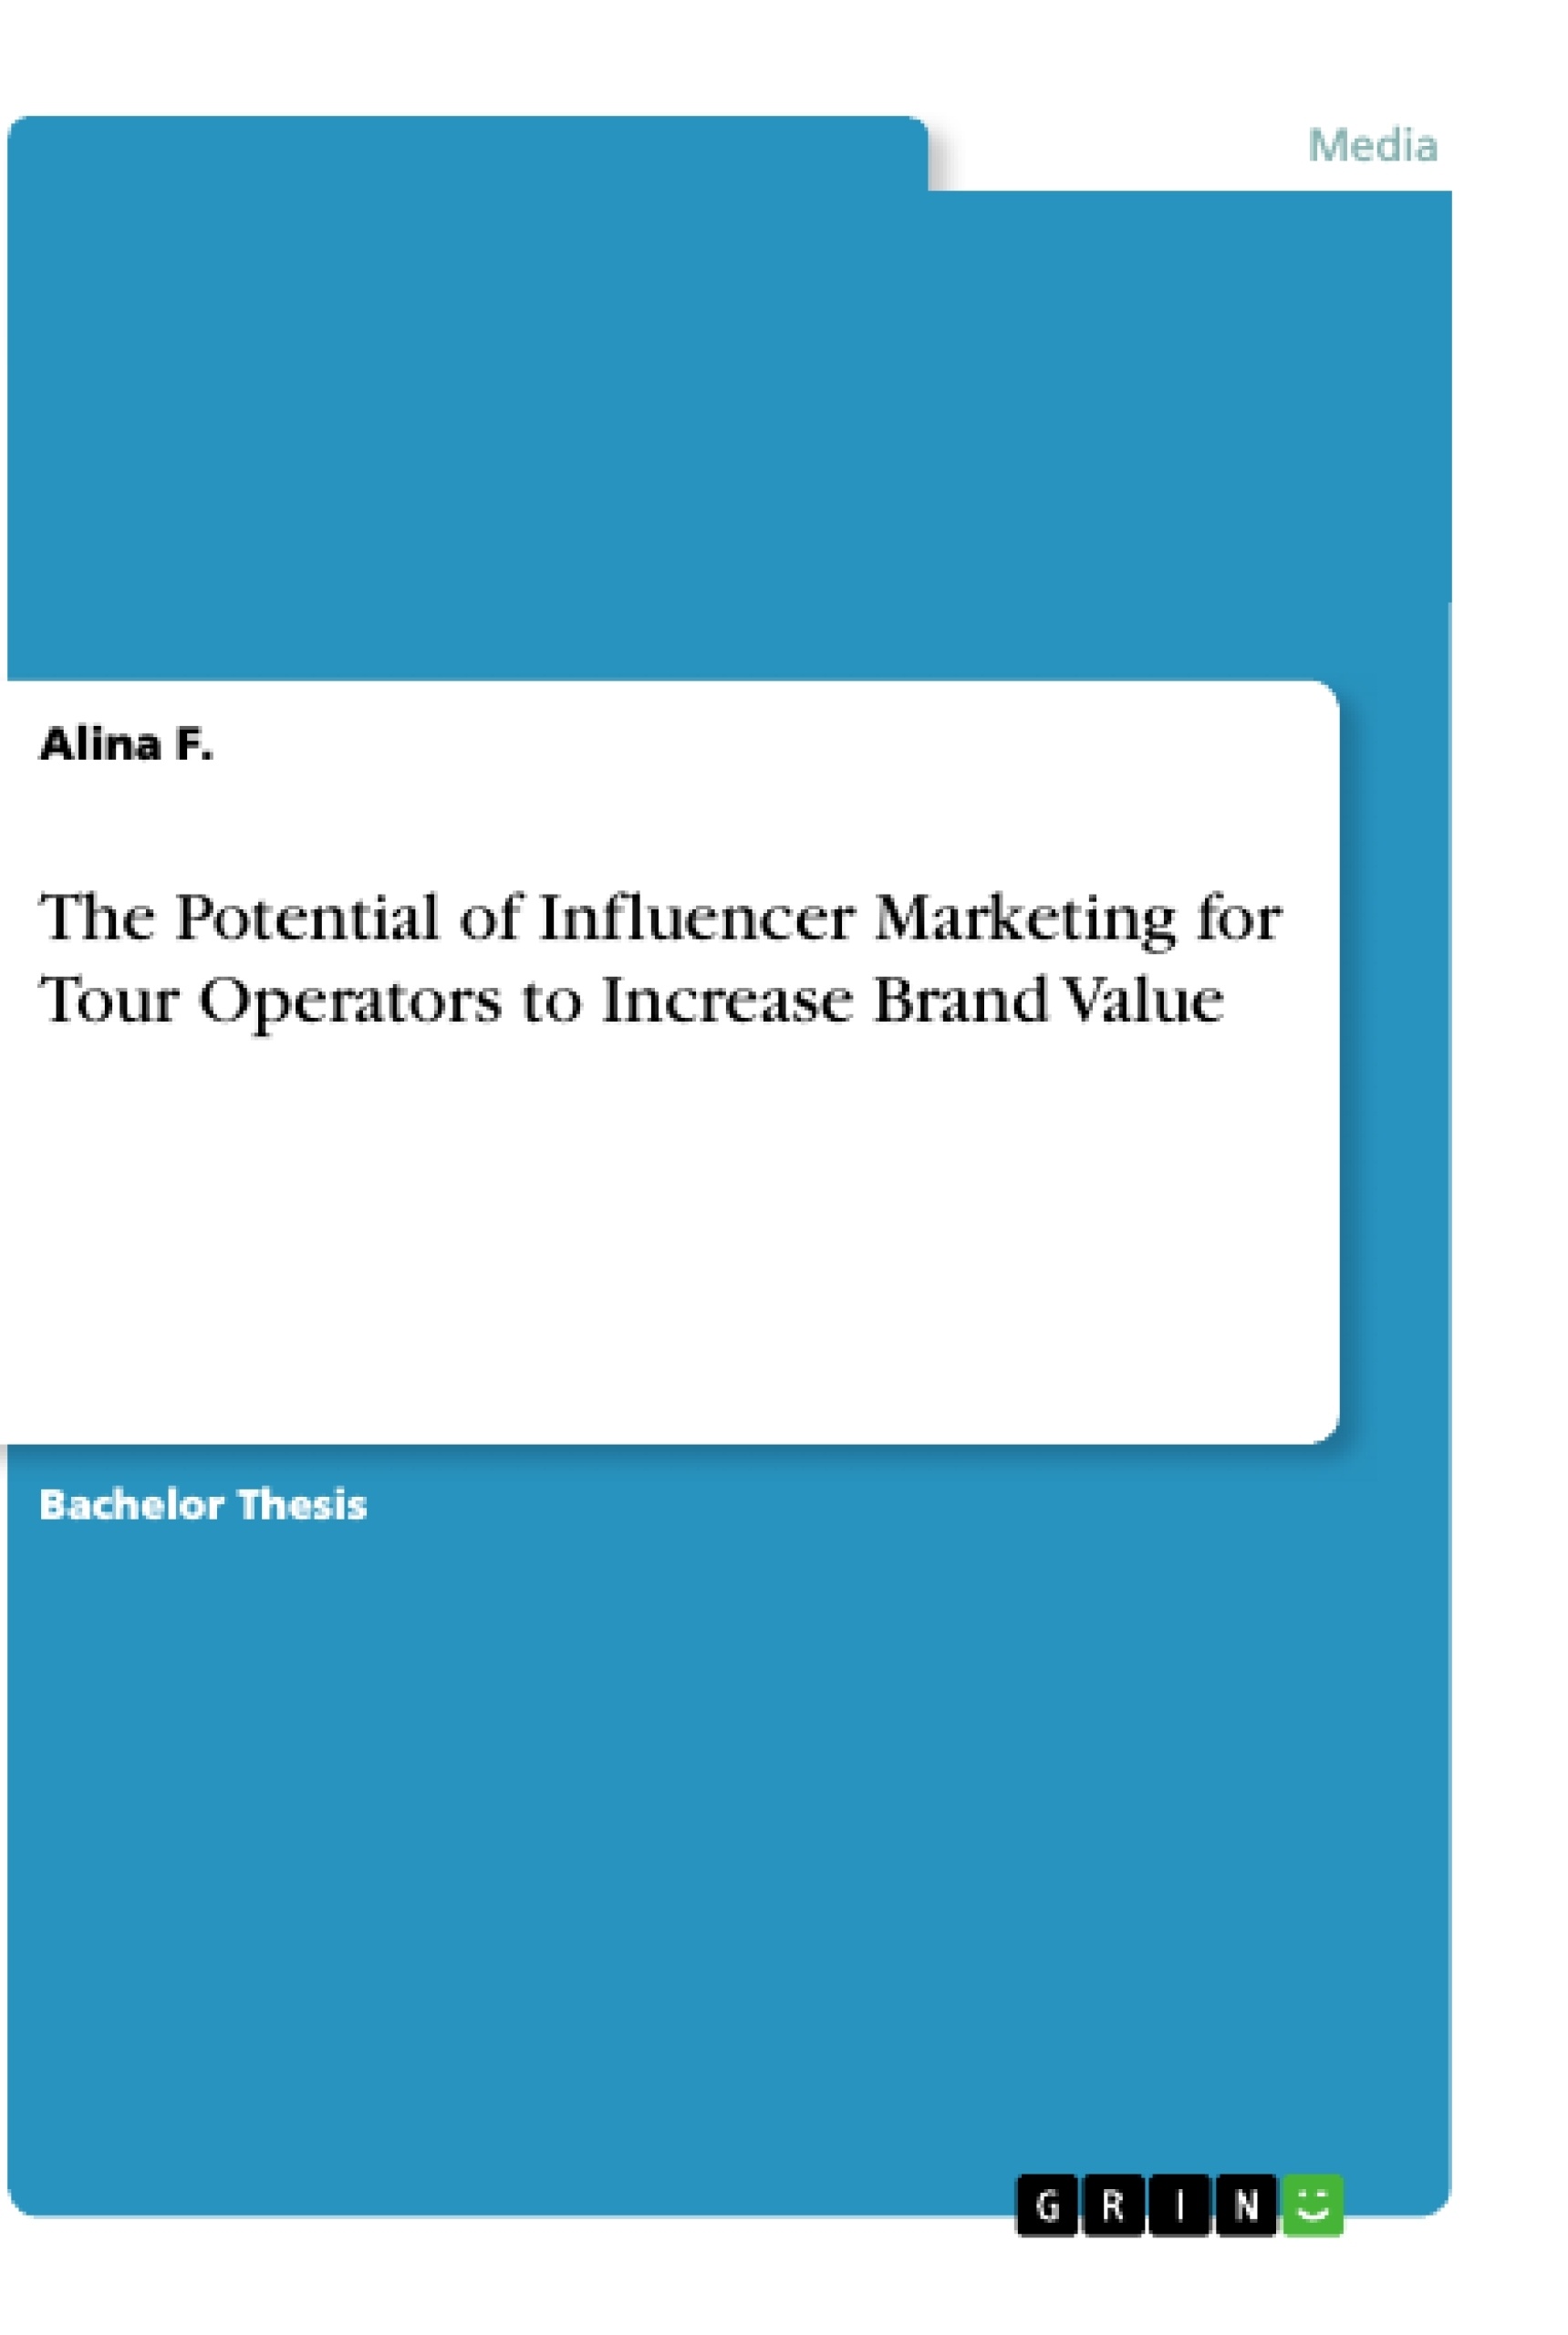 Title: The Potential of Influencer Marketing for Tour Operators to Increase Brand Value